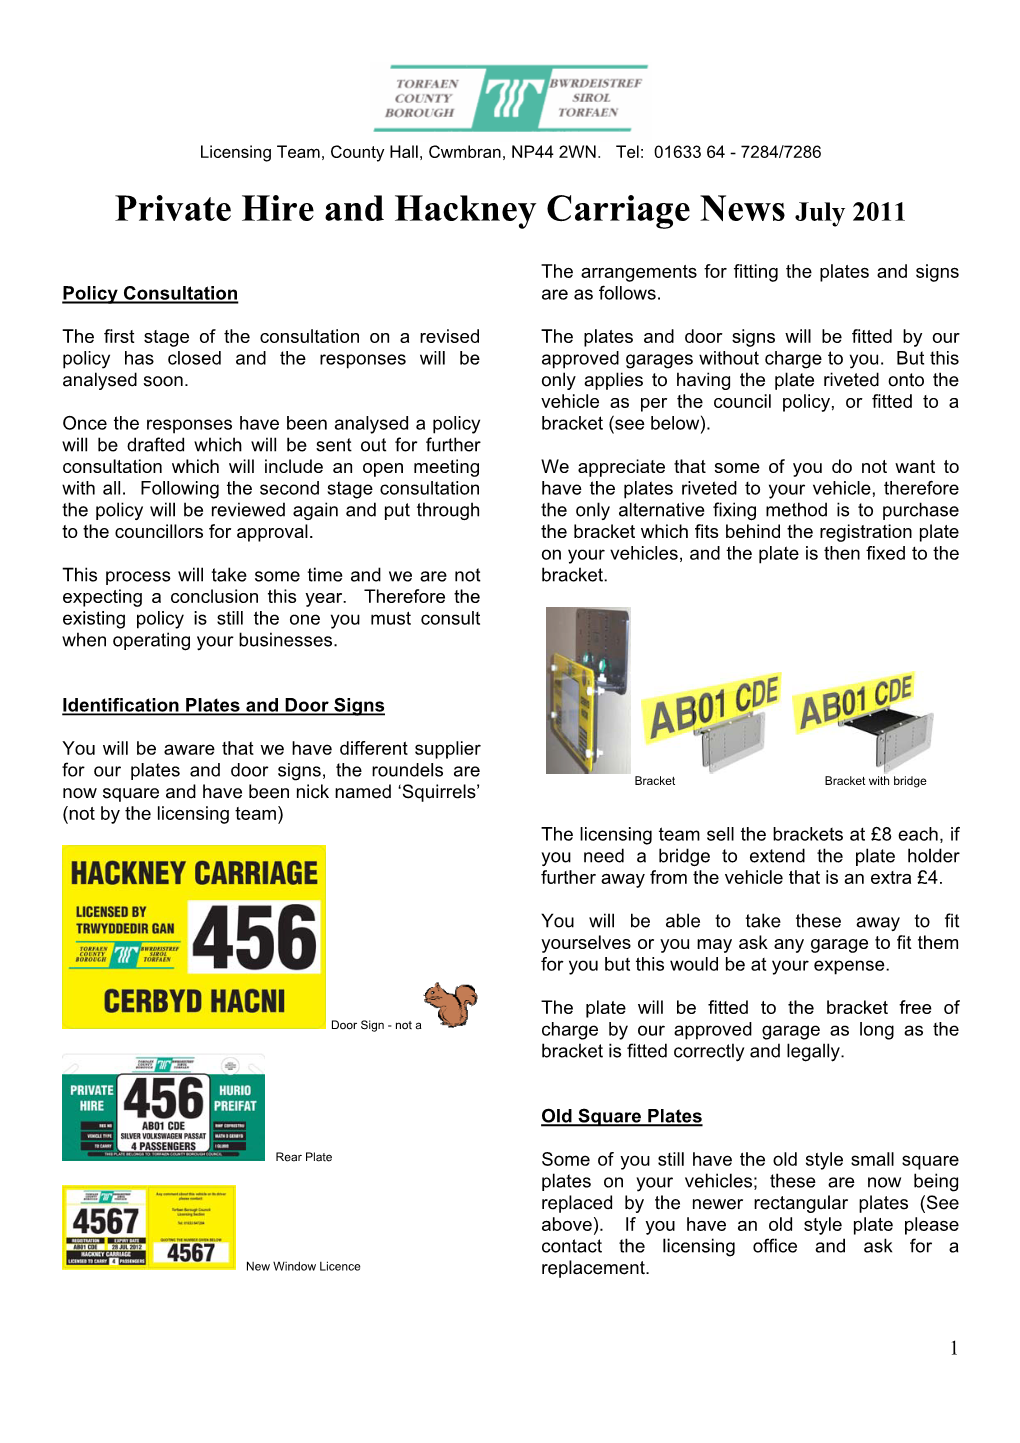 Private Hire and Hackney Carriage News July 2011